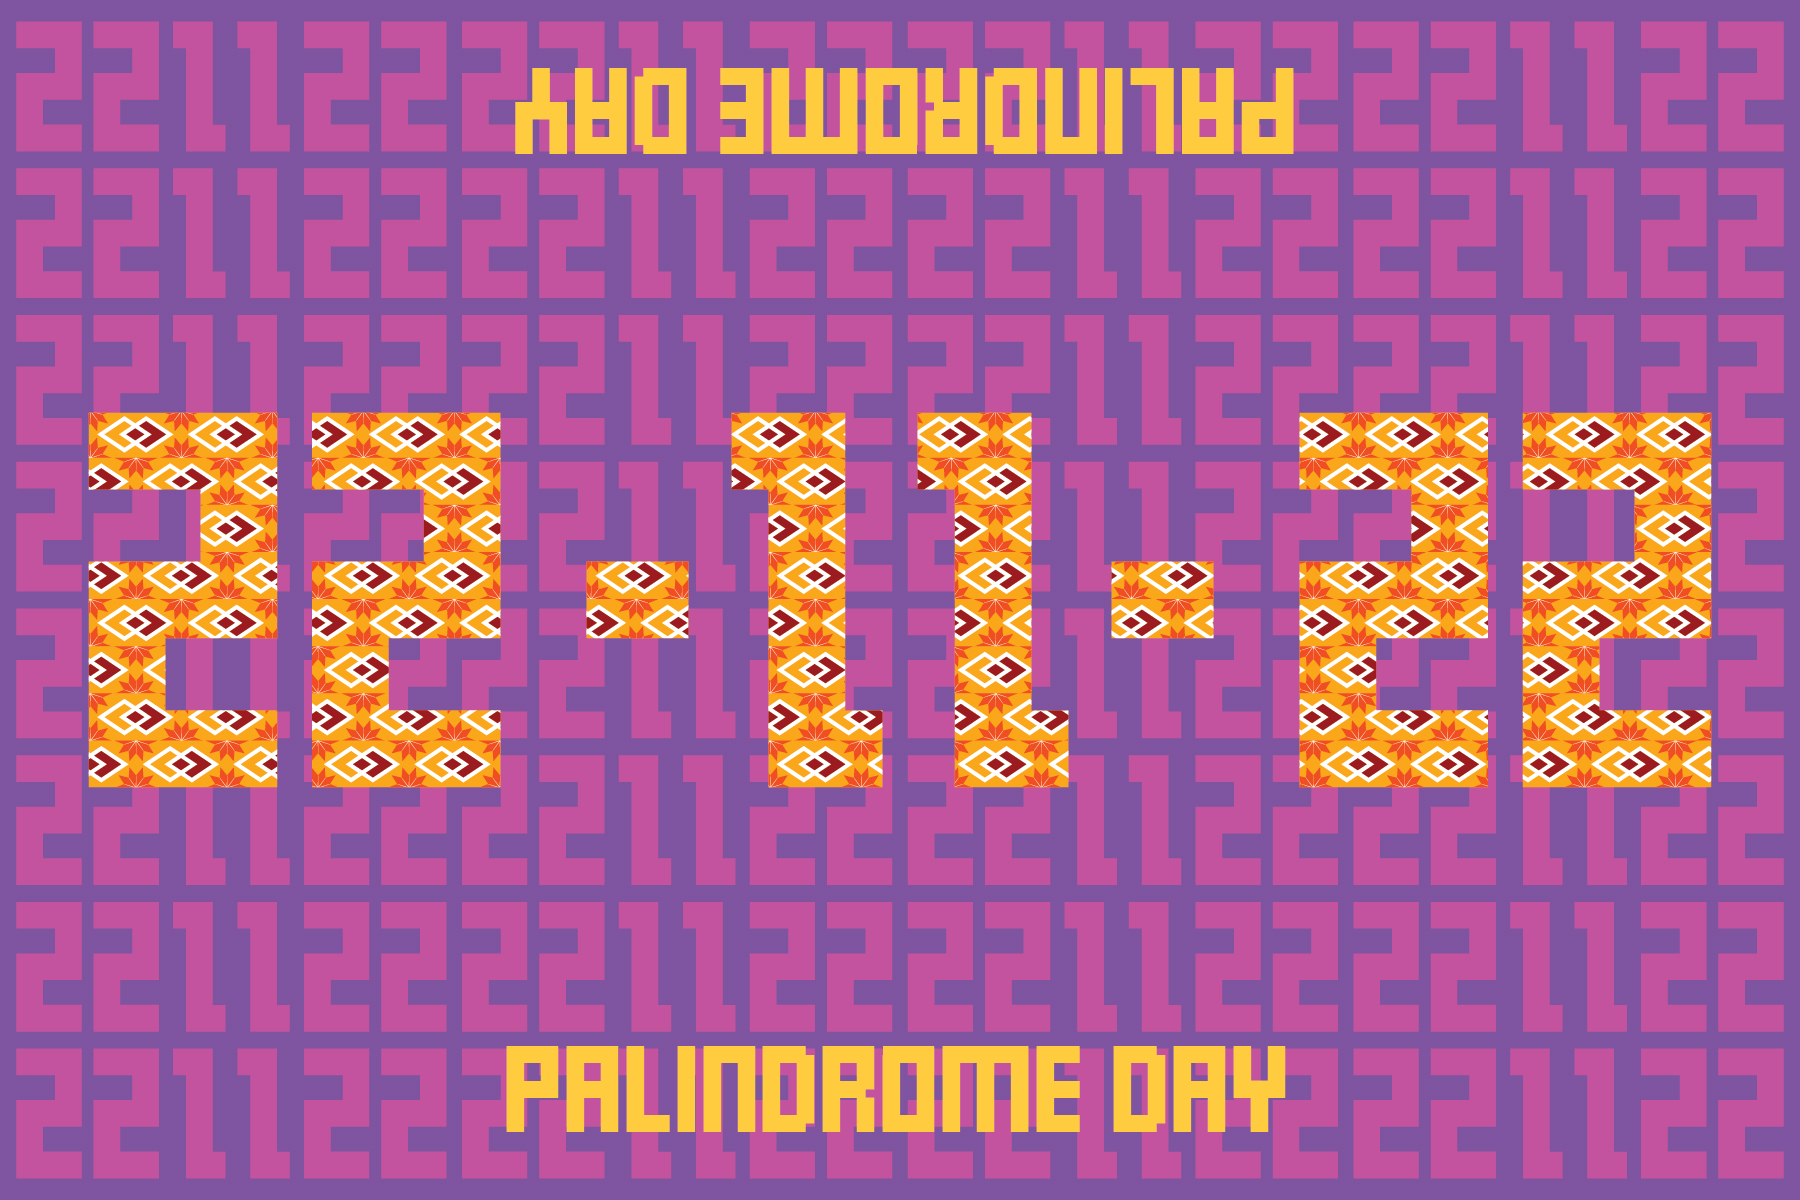 PALINDROME DATE 221122 - 3 DESIGNS